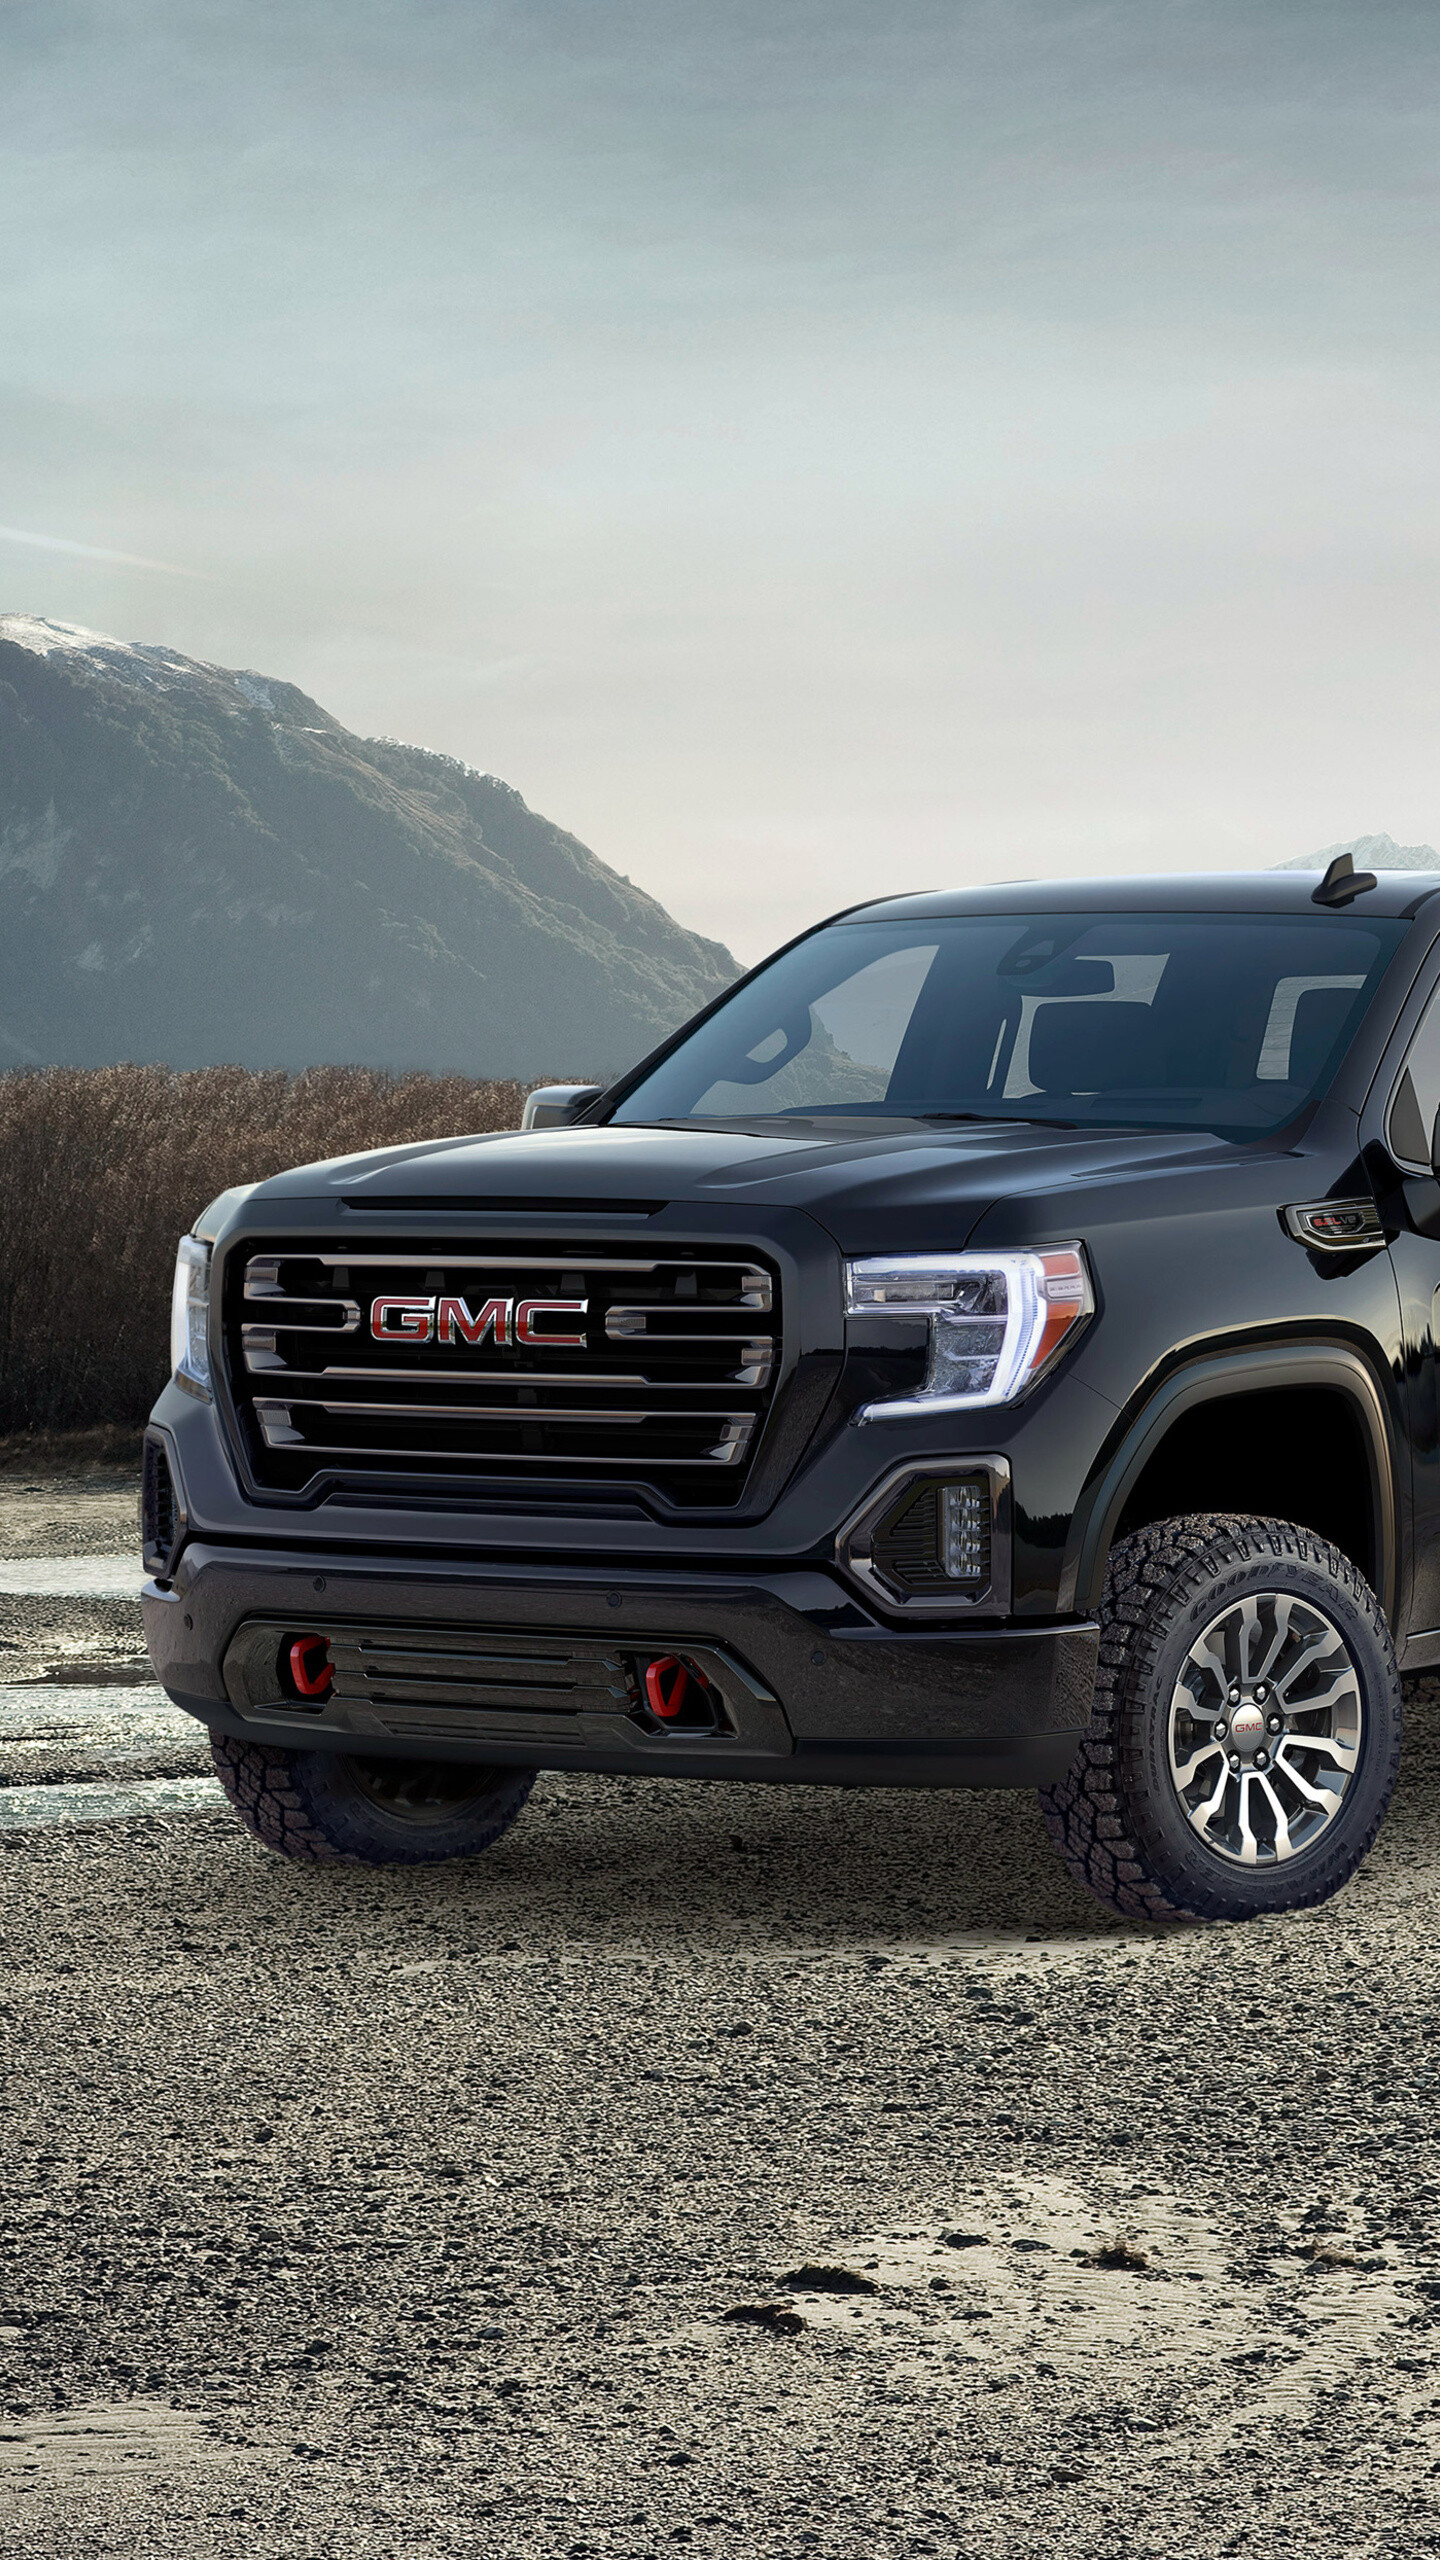 GMC: 2019 GMC Sierra AT4, A unique formula of authentic off-road capability and innovative technology. 1440x2560 HD Background.